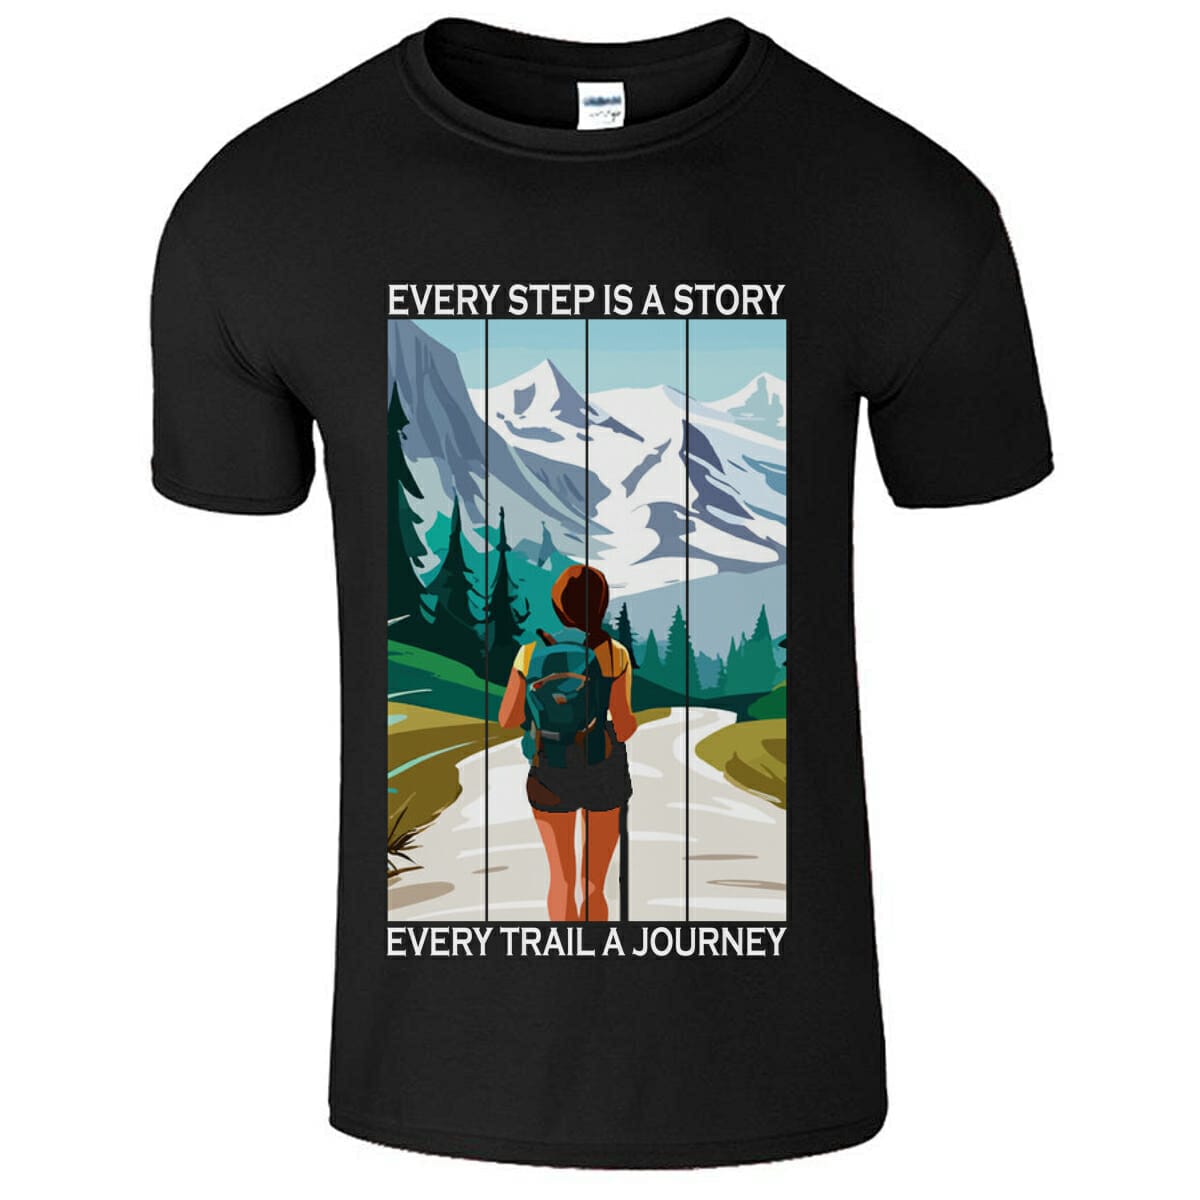 Every Step Is A Story Every Trail A Journey - Free T-Shirt Design For Hiking